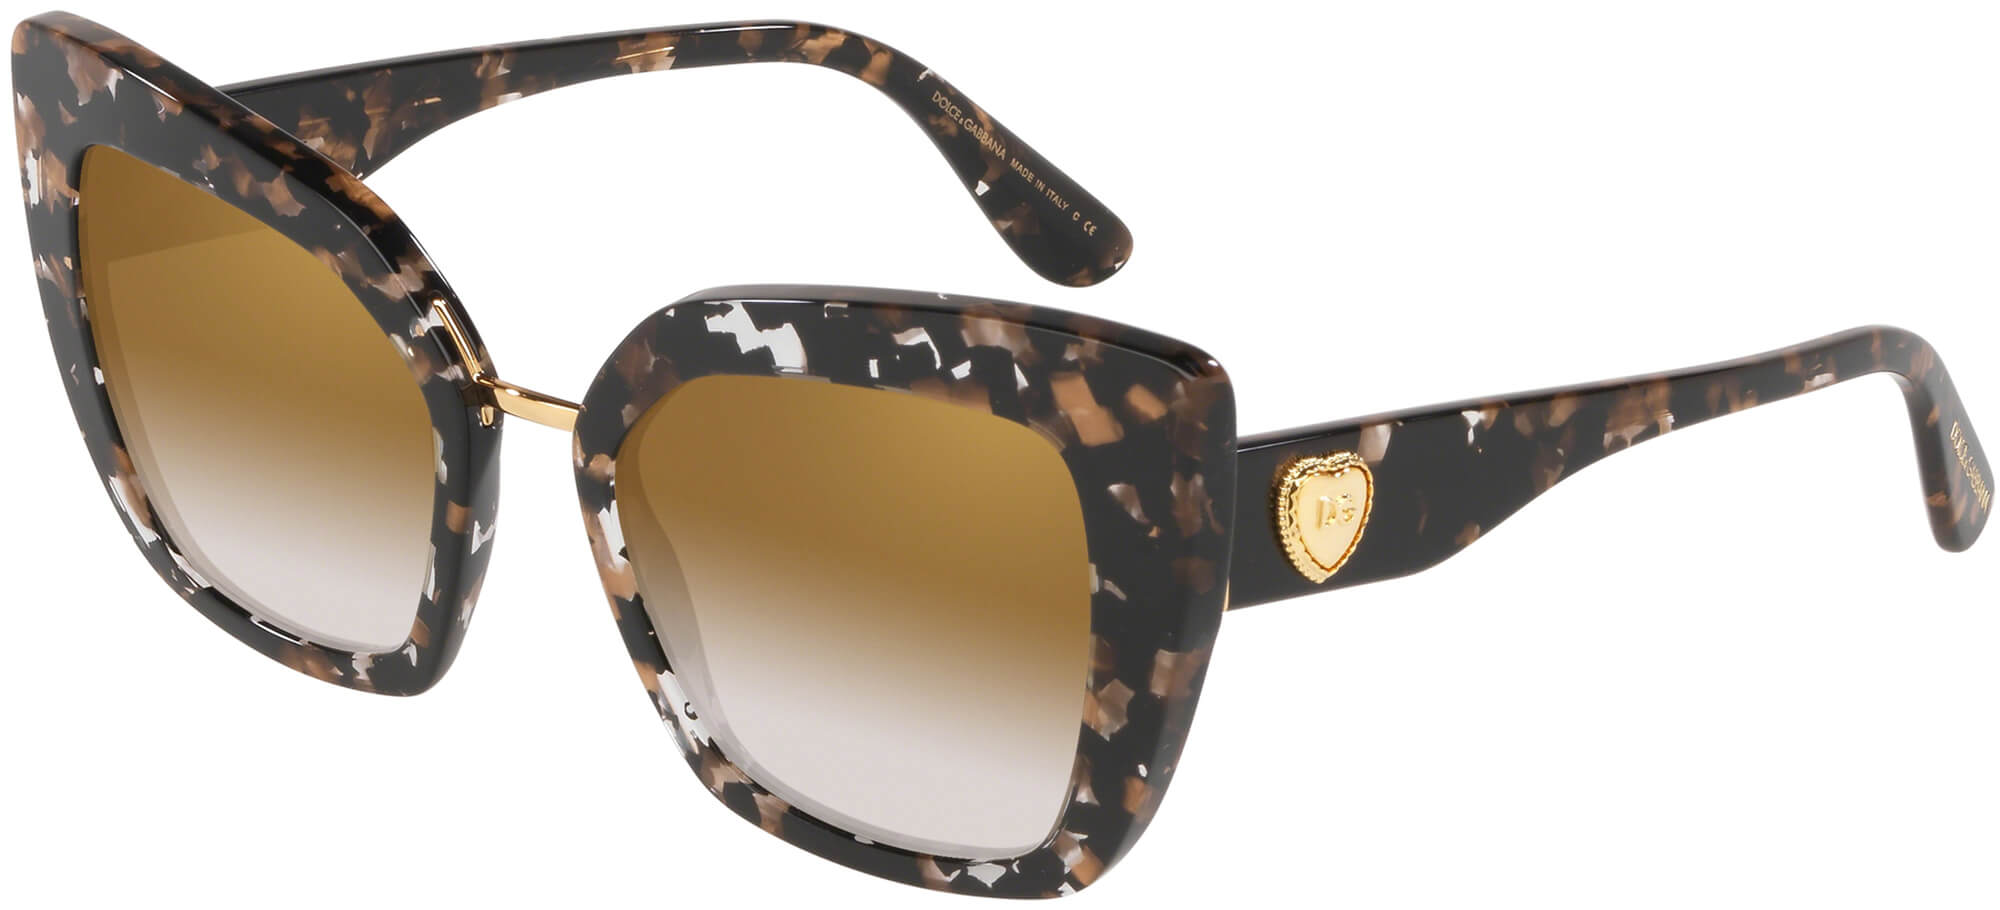 Dolce & GabbanaCUORE SACRO DG 4359Cube Black/brown Gold Shaded (911/6E A)